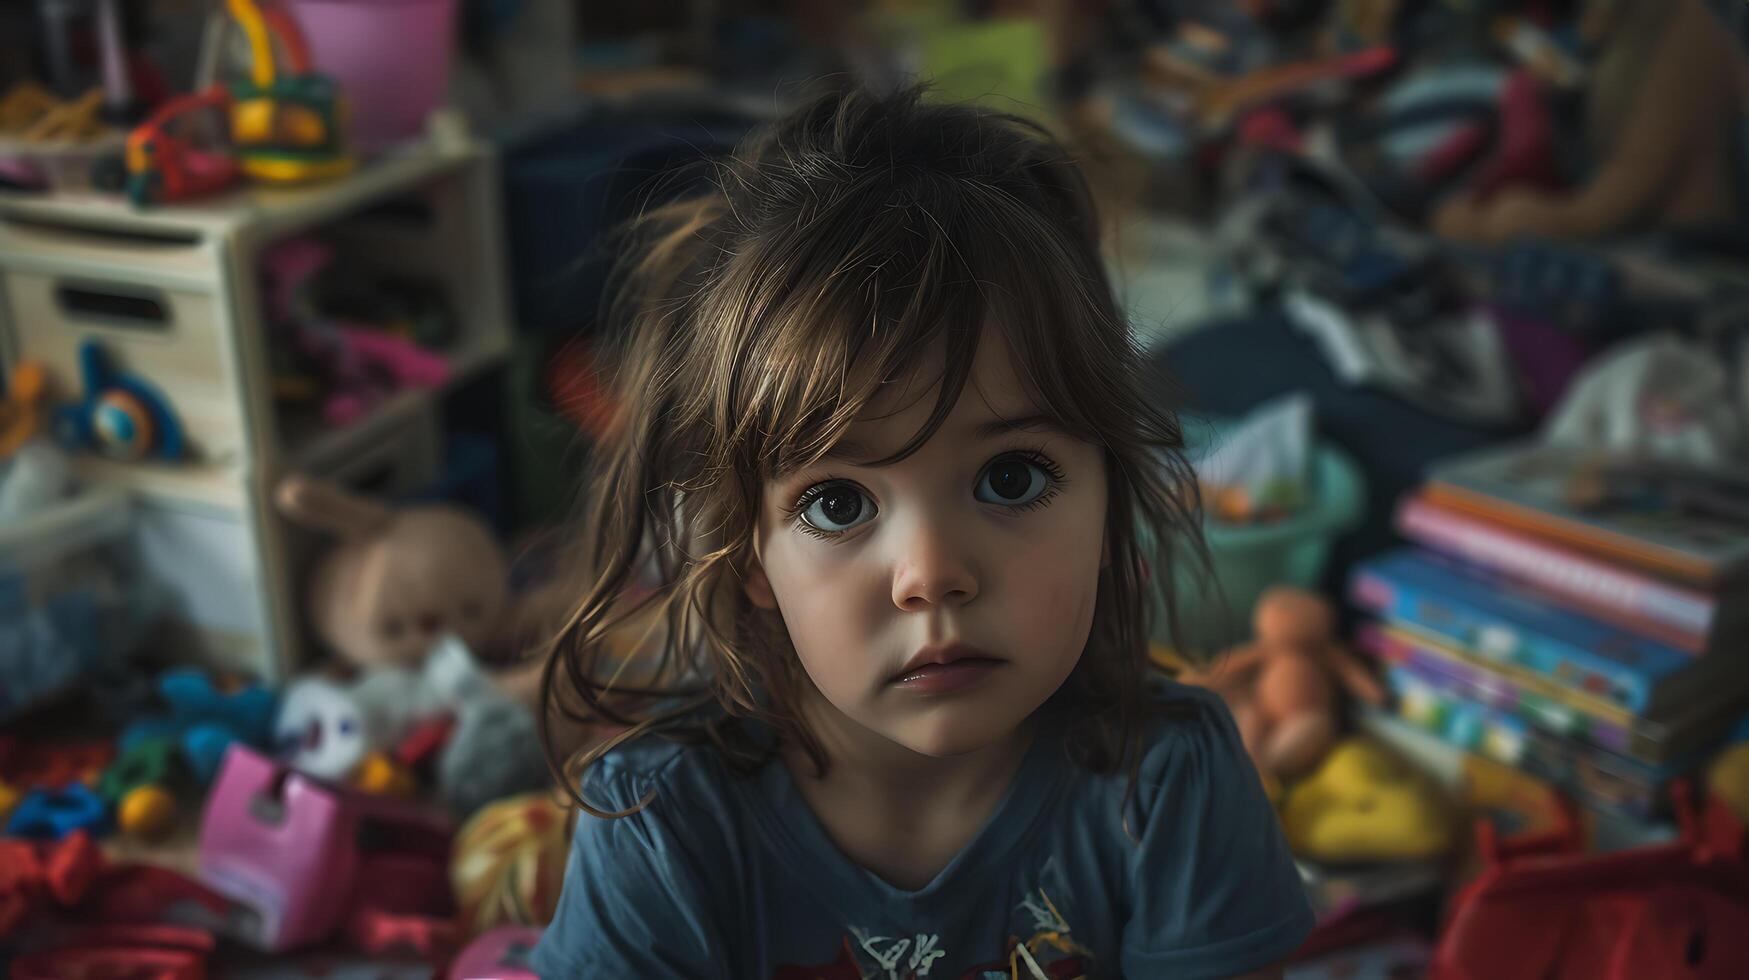 AI generated Thoughtful Girl Surrounded by Cluttered Toys and Books in Messy Bedroom Captured in CloseUp 50mm Shot photo